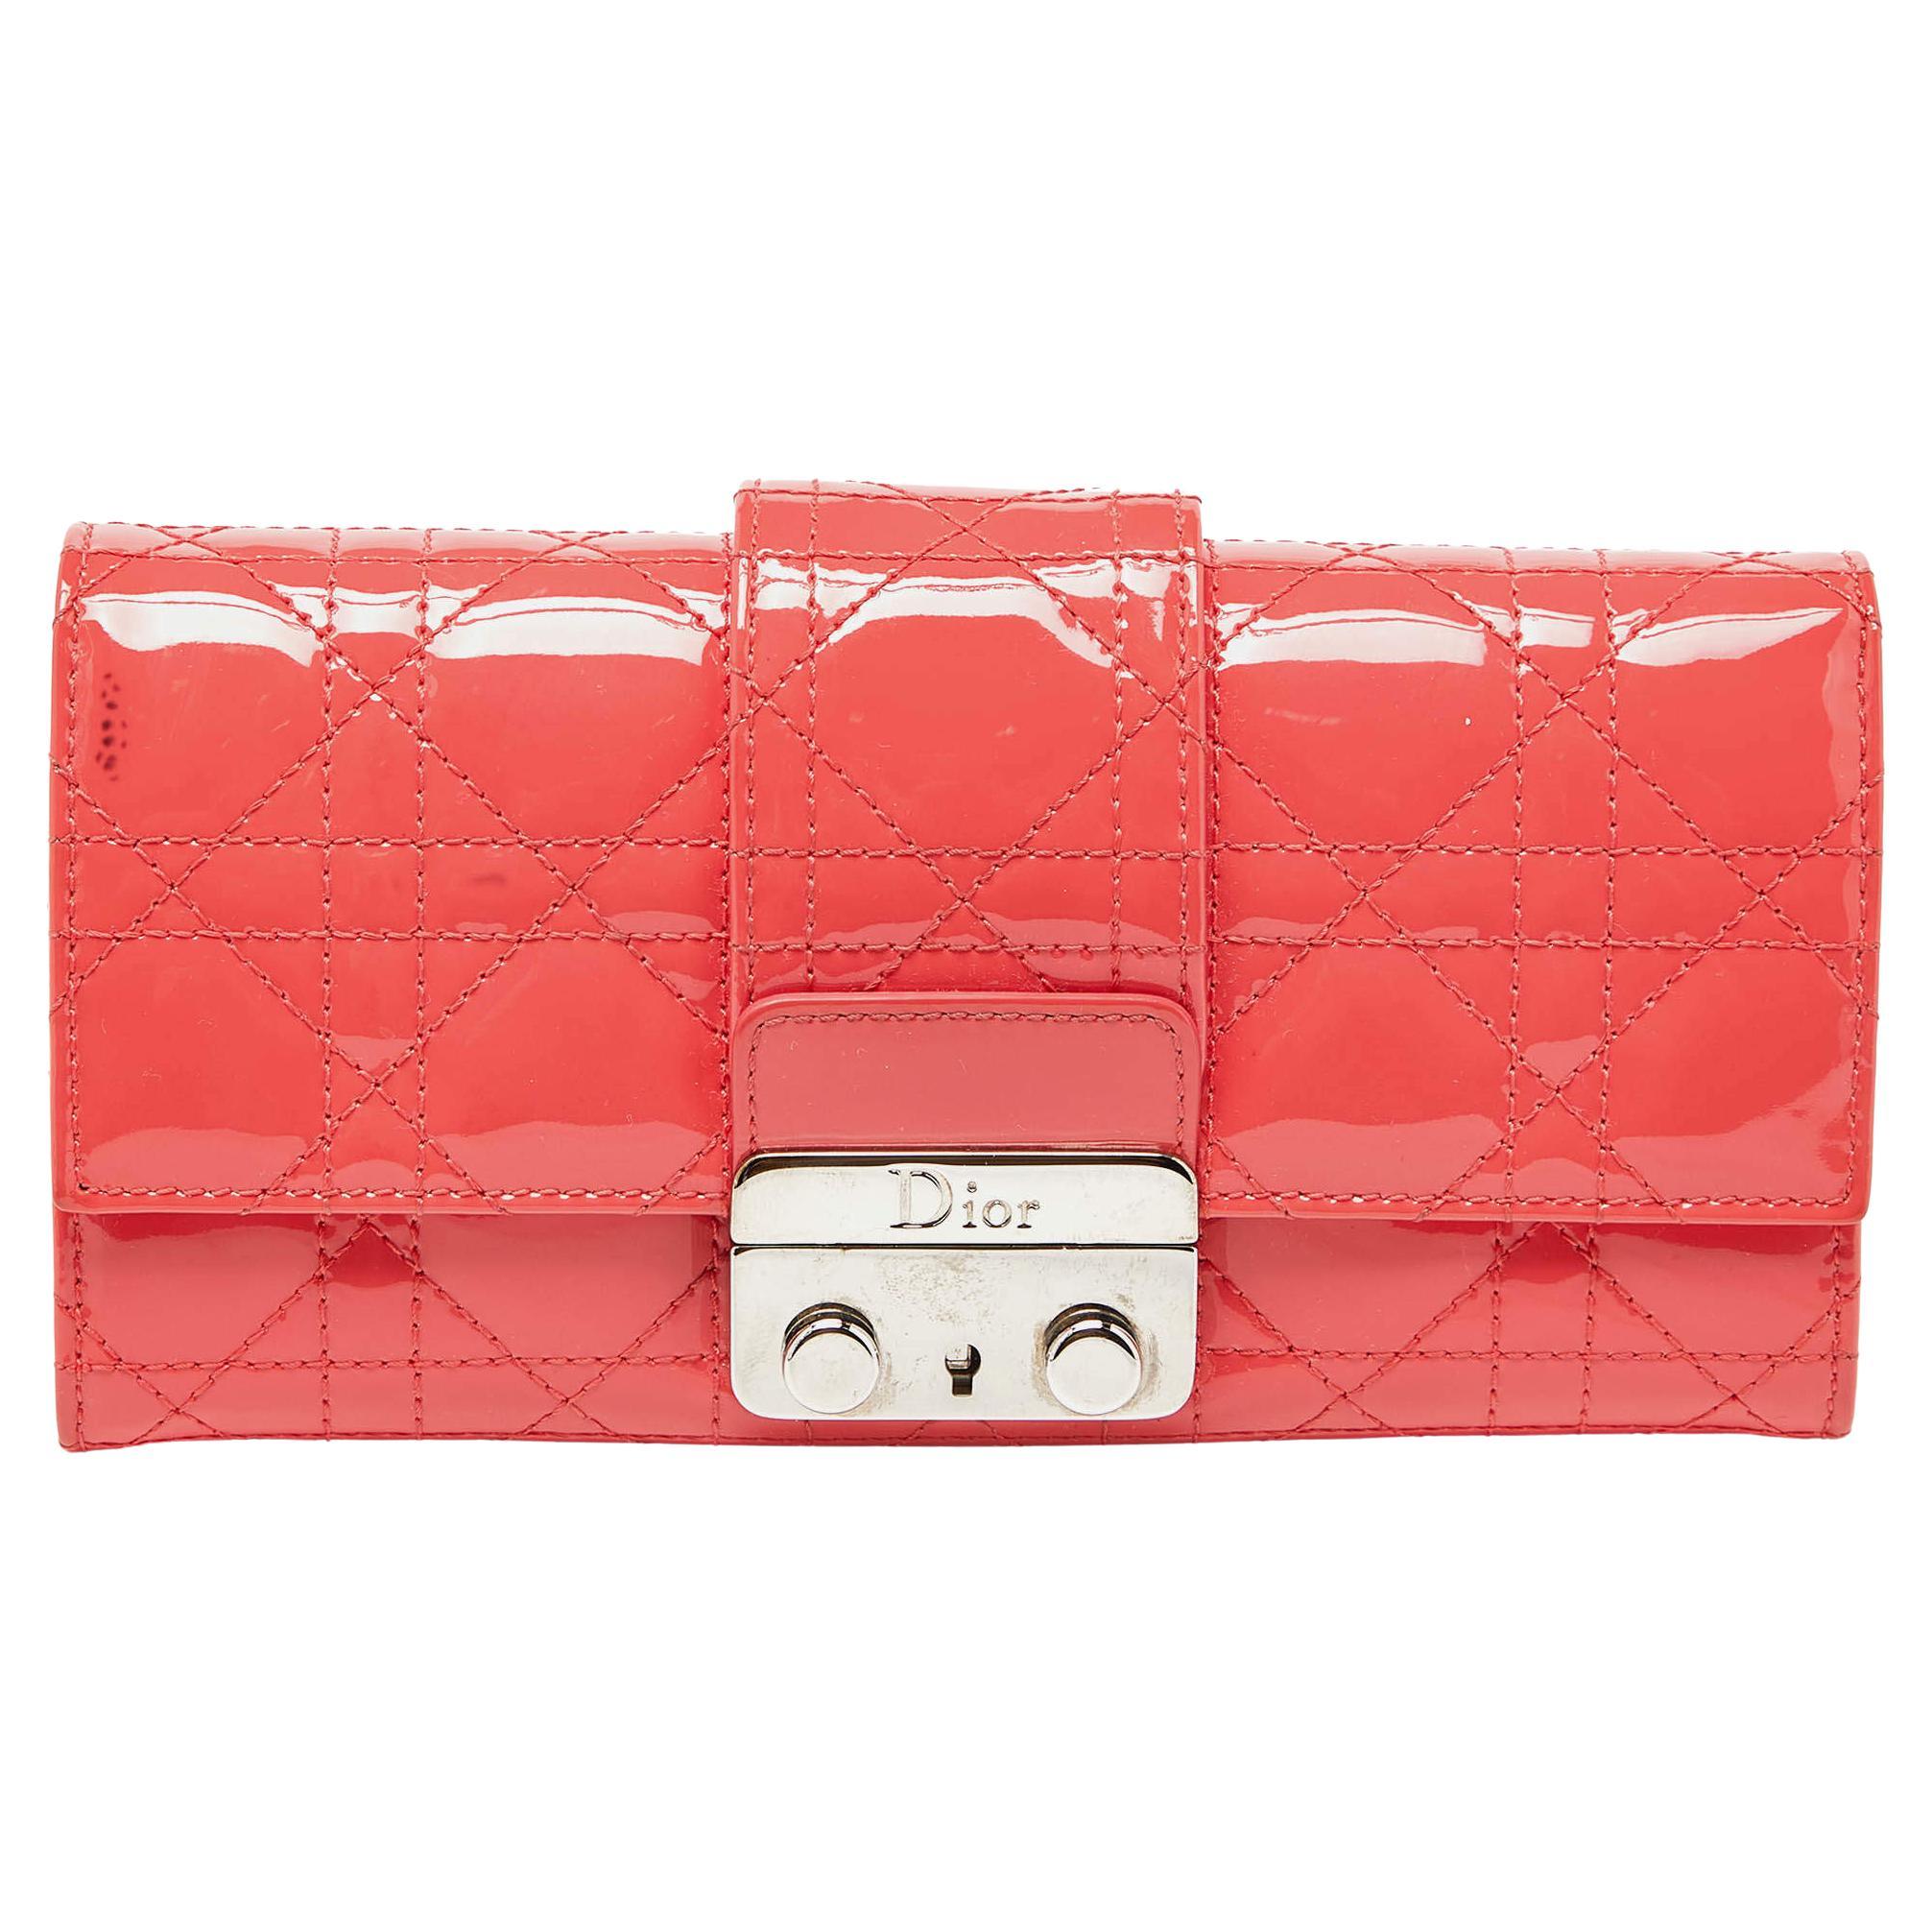 Dior Orange Cannage Patent Leather Miss Dior Promenade Wallet For Sale